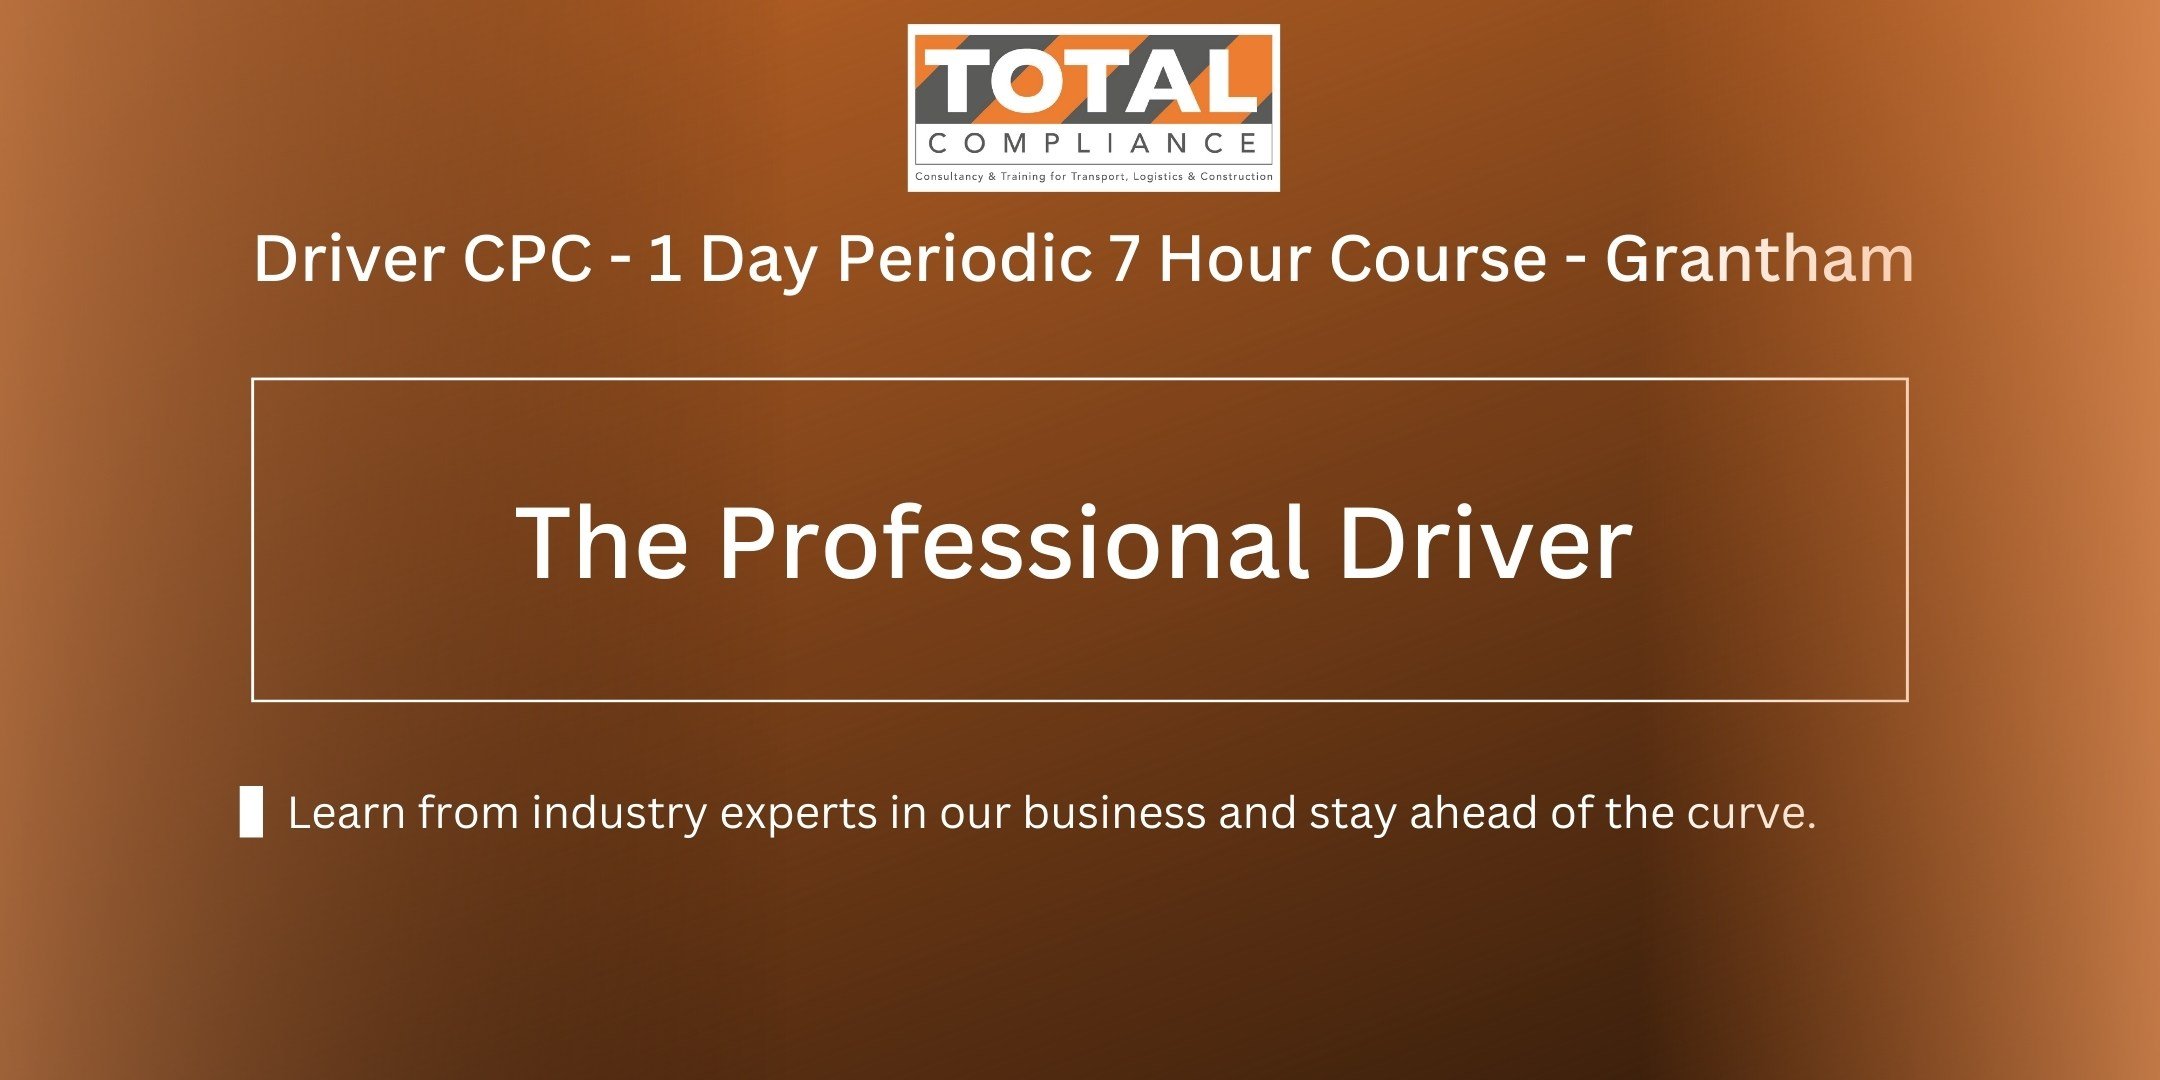 Driver CPC - 1 Day Periodic 7 Hour Course/The Professional Driver - Grantham